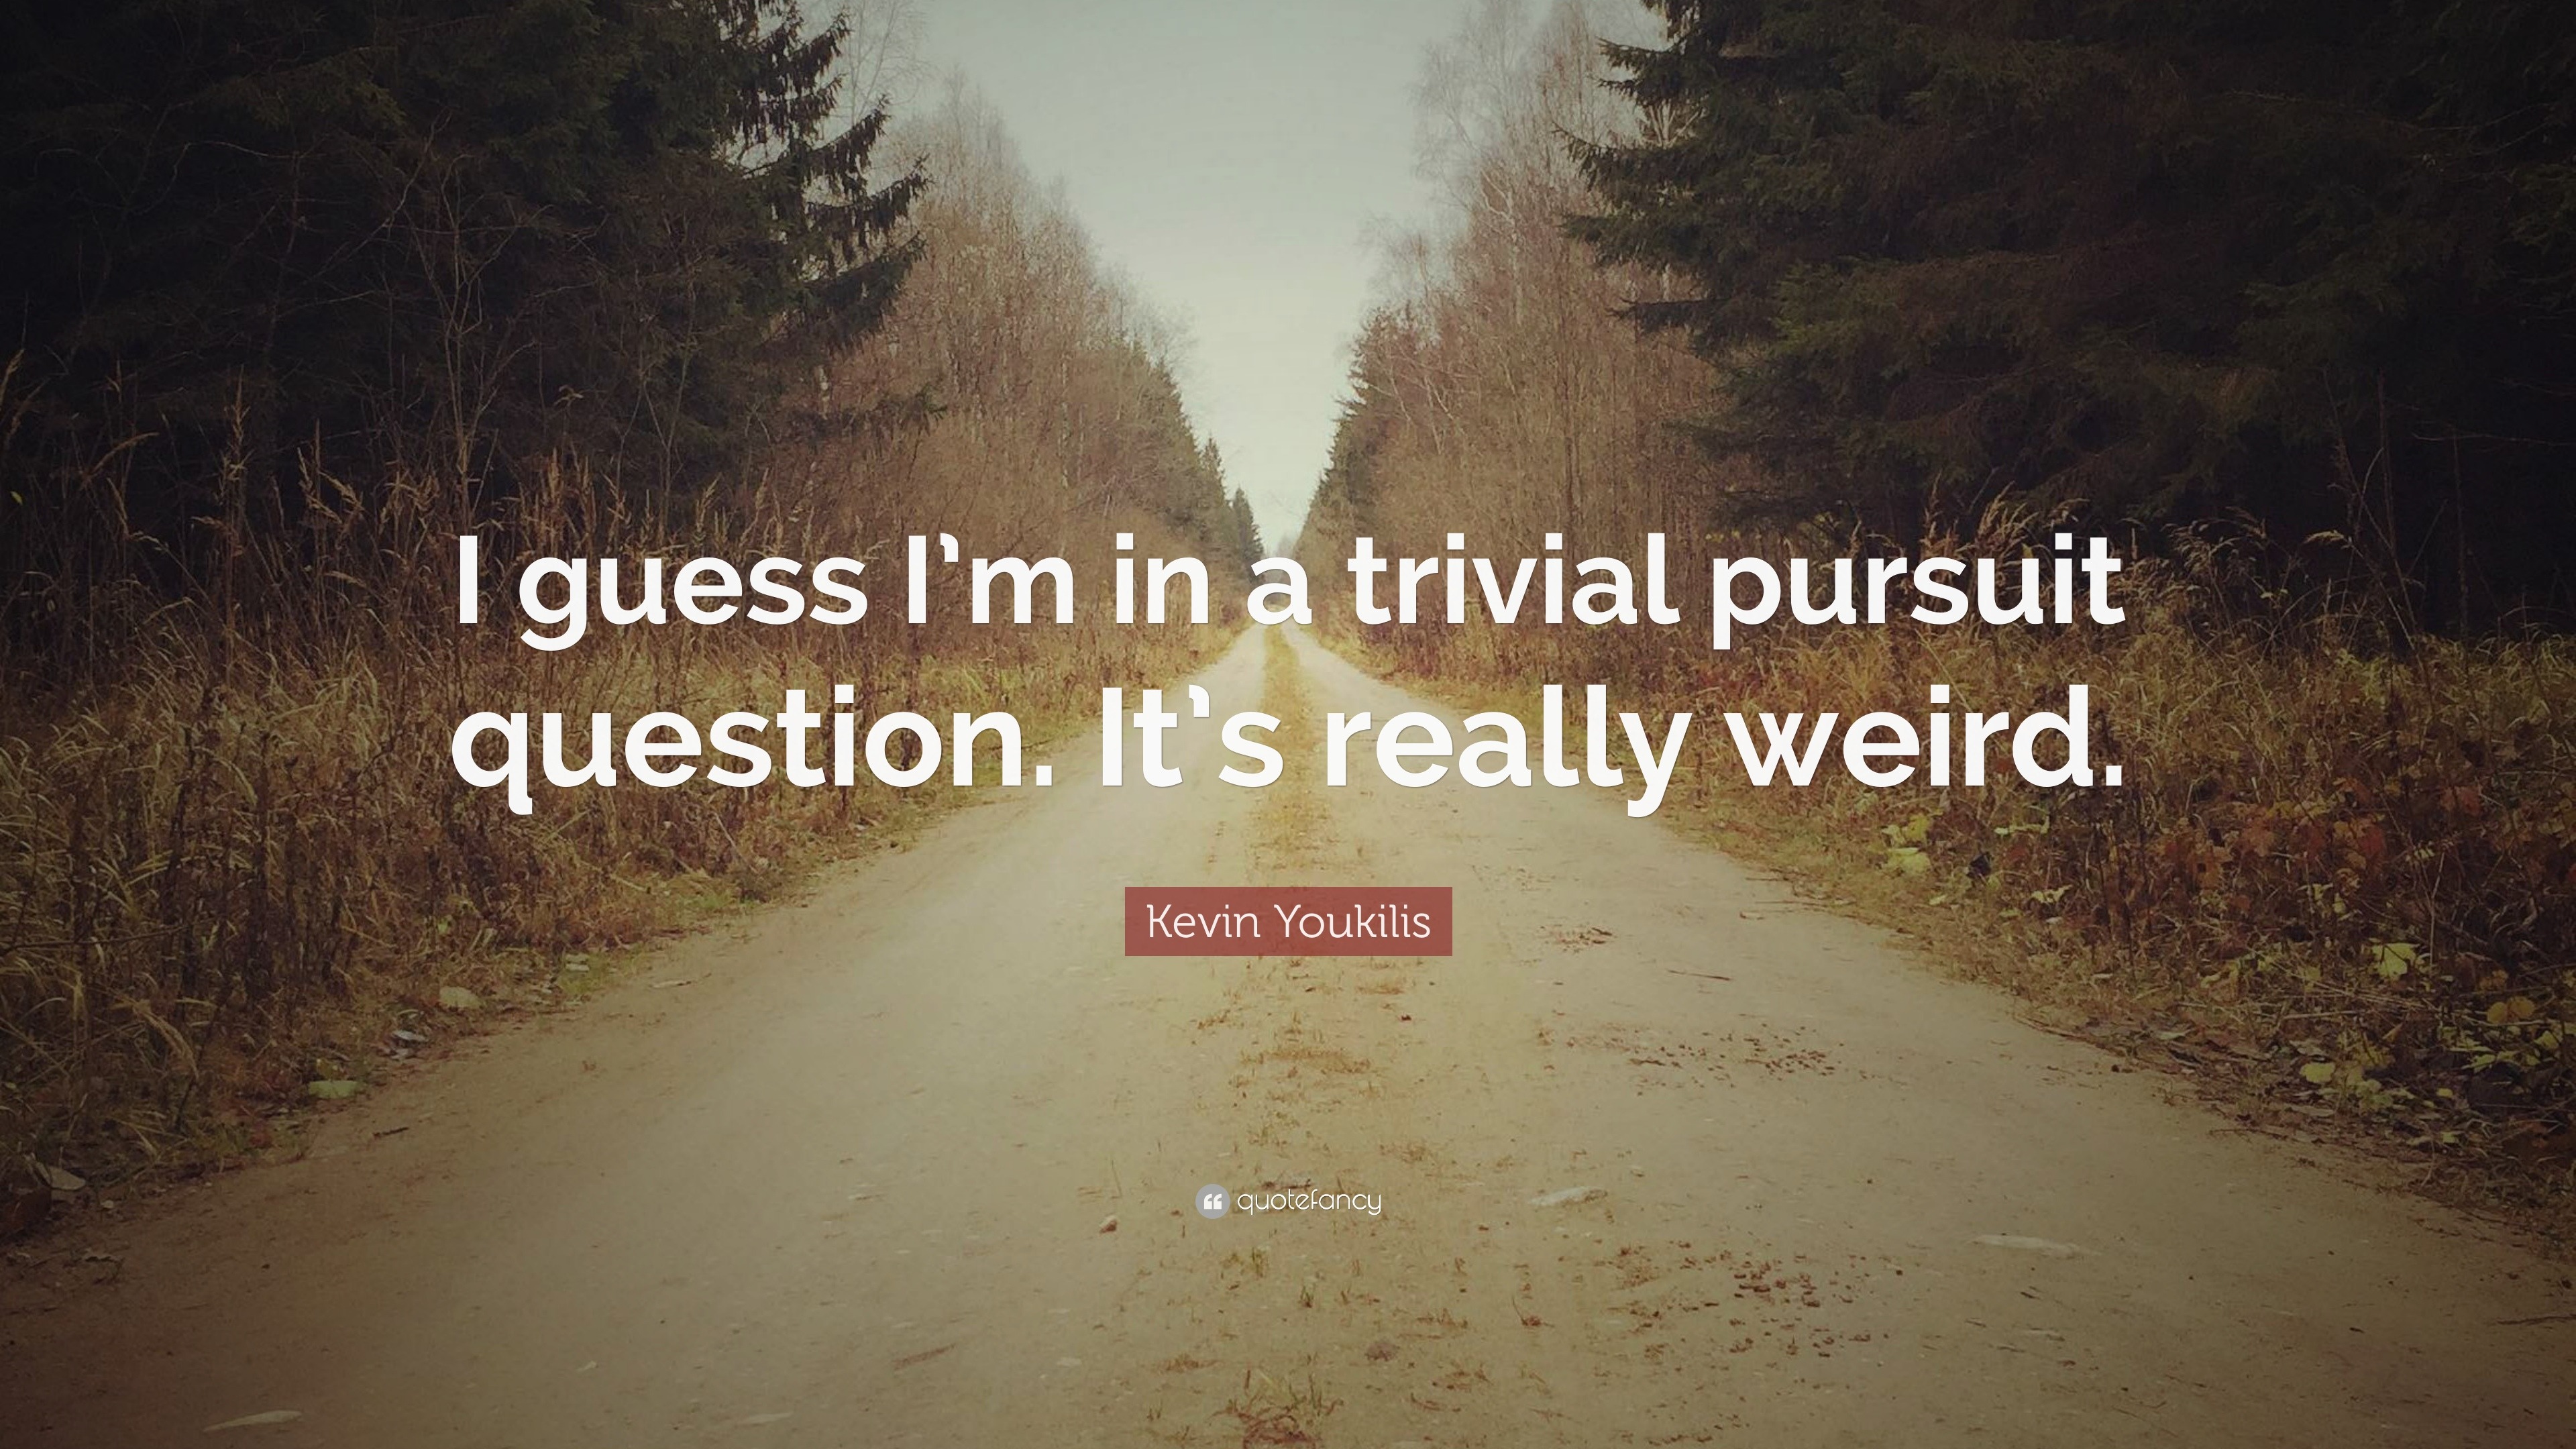 tro på håndvask indtil nu Kevin Youkilis Quote: “I guess I'm in a trivial pursuit question. It's  really weird.”